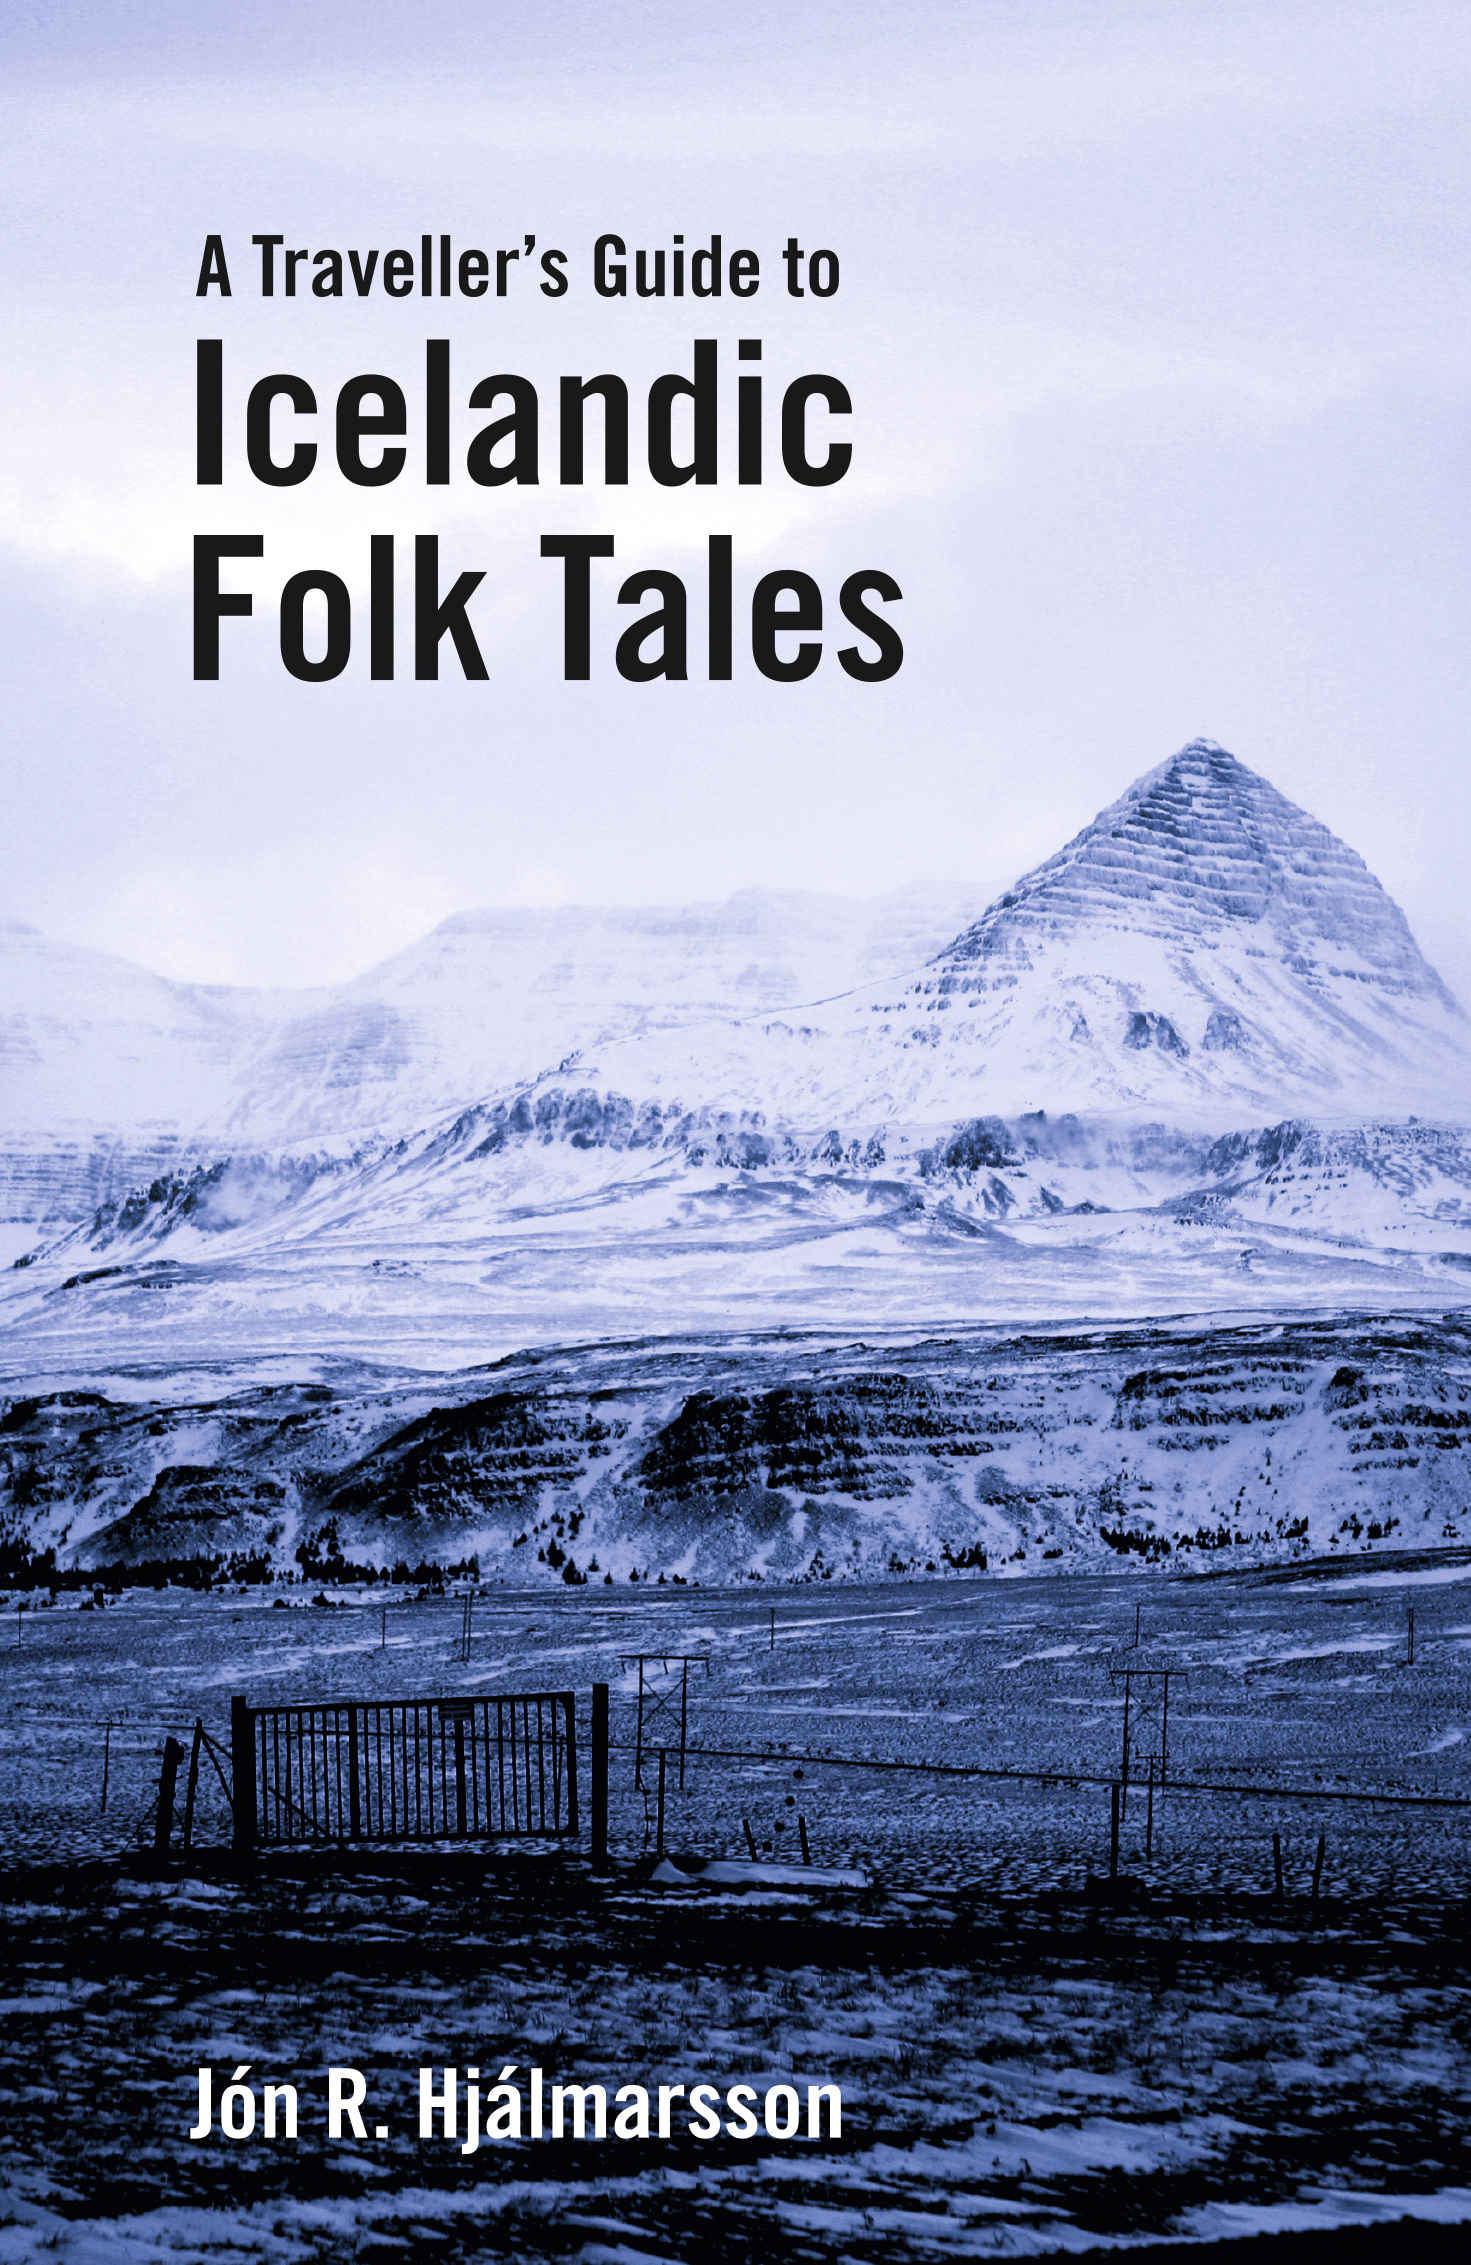 History of Iceland (1994)